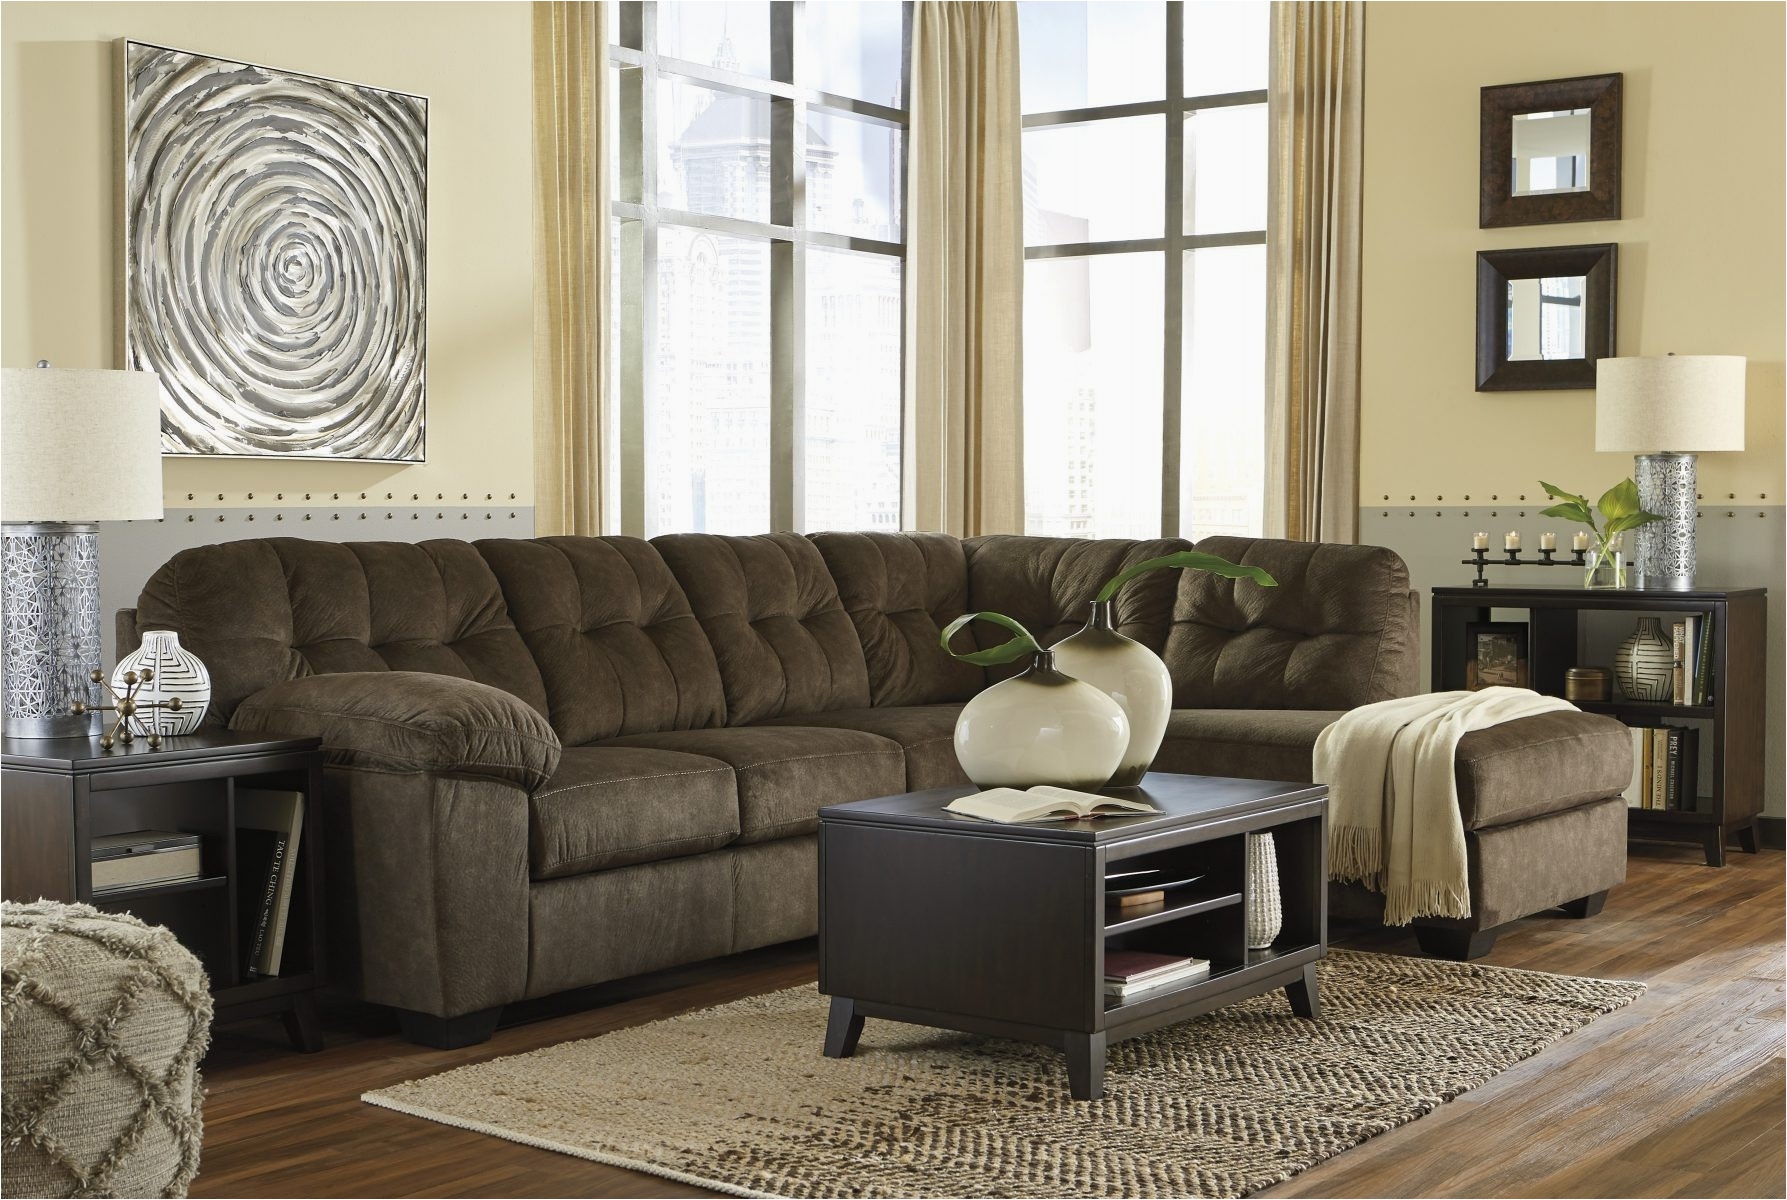 ashley furniture coffee table set best of living room 37 ashley furniture living room sets 999